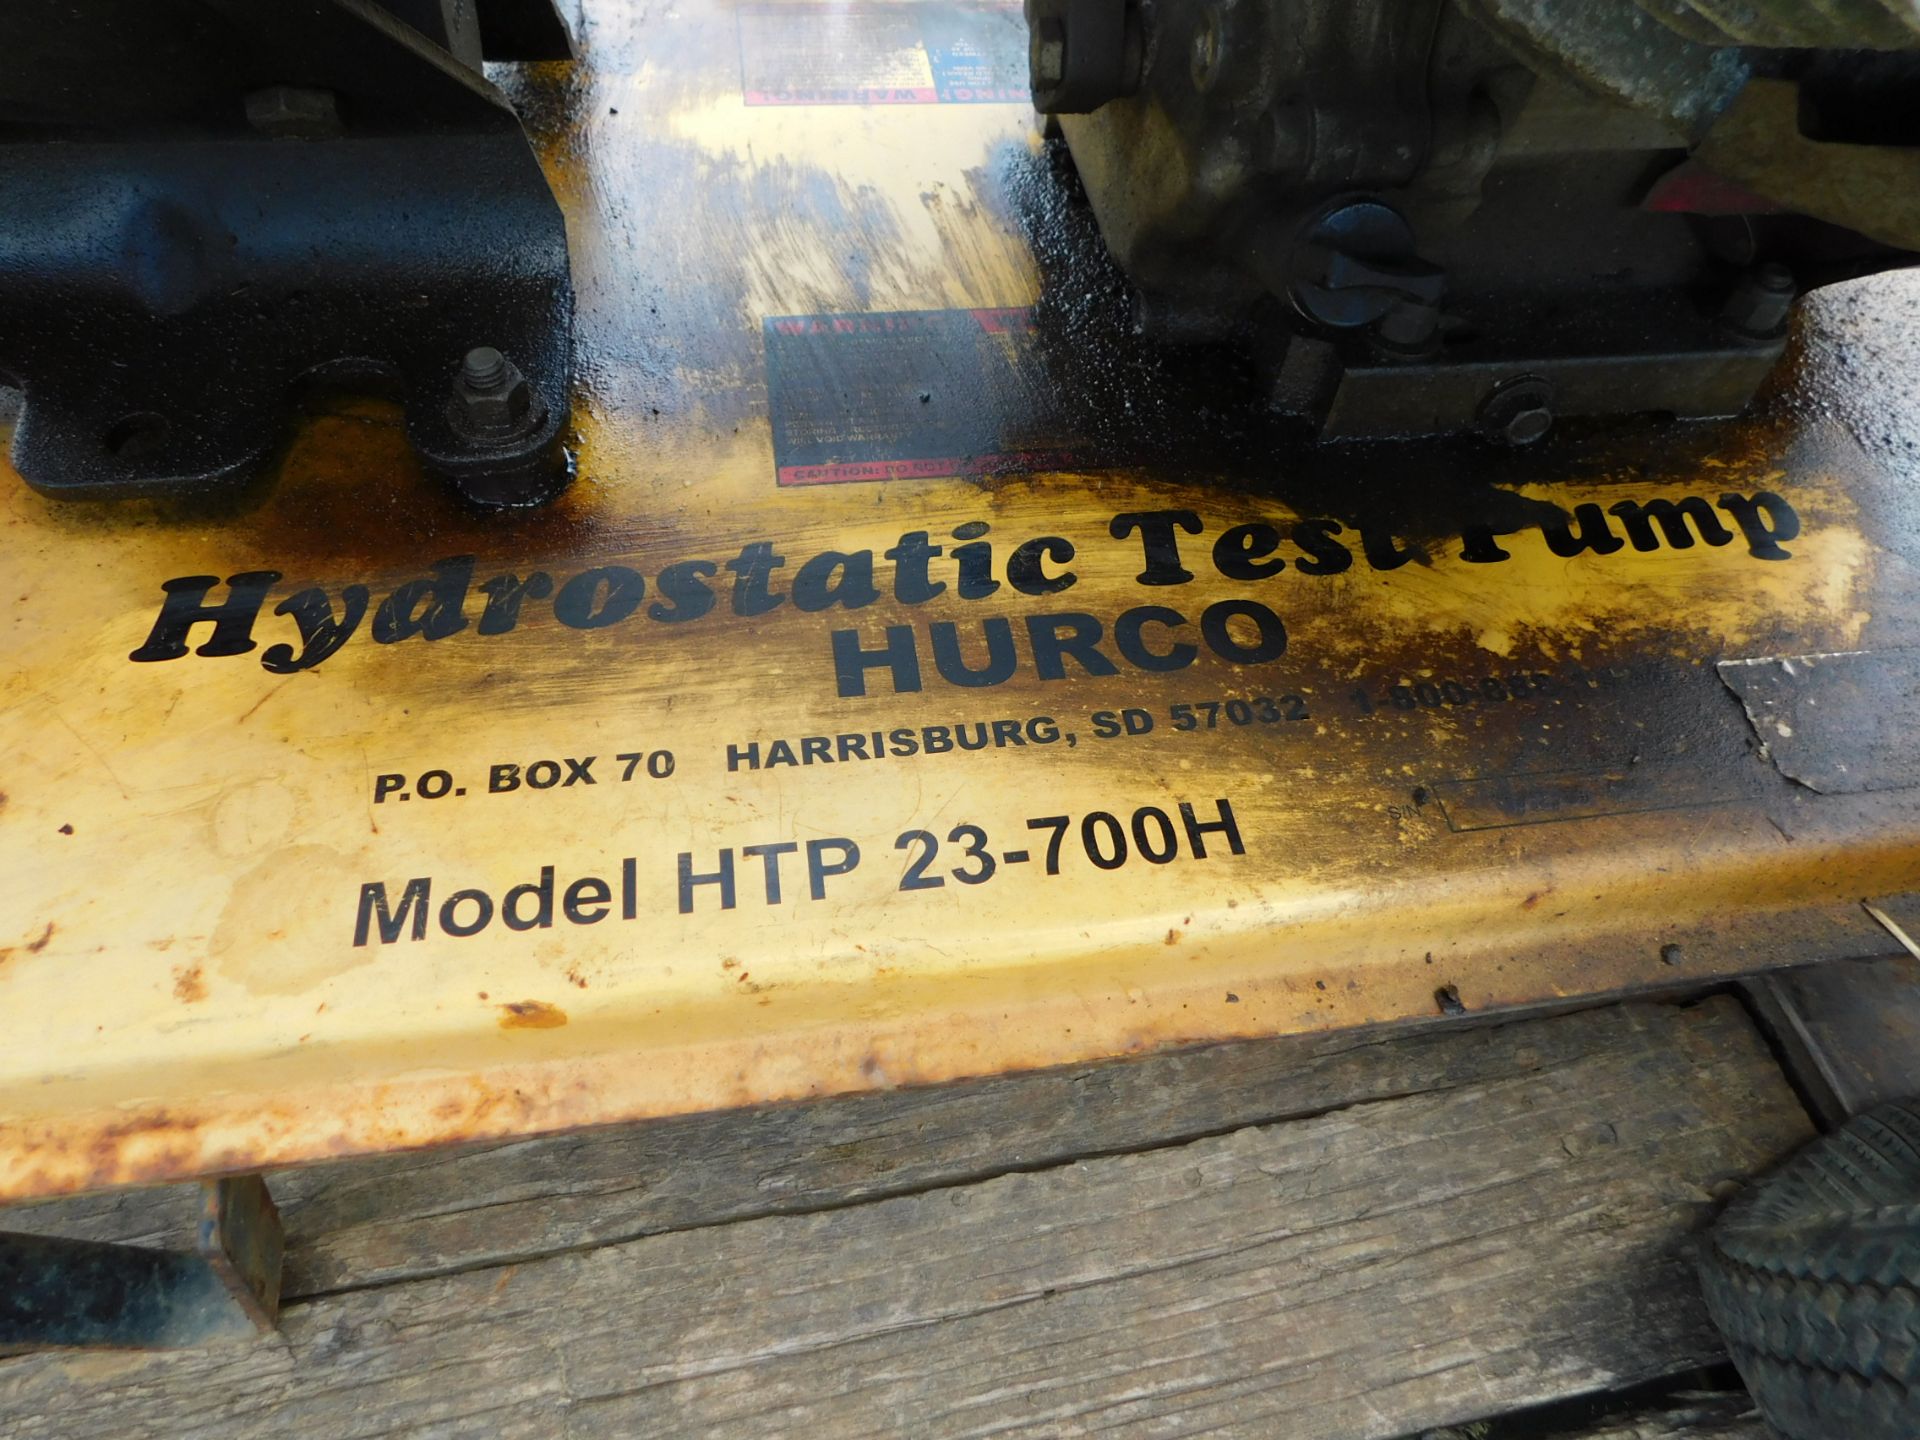 Hurco Model HTP-23-700H Gas-Powered Hydrostatic Test Pump with Honda GX 390 Engine - Image 5 of 7